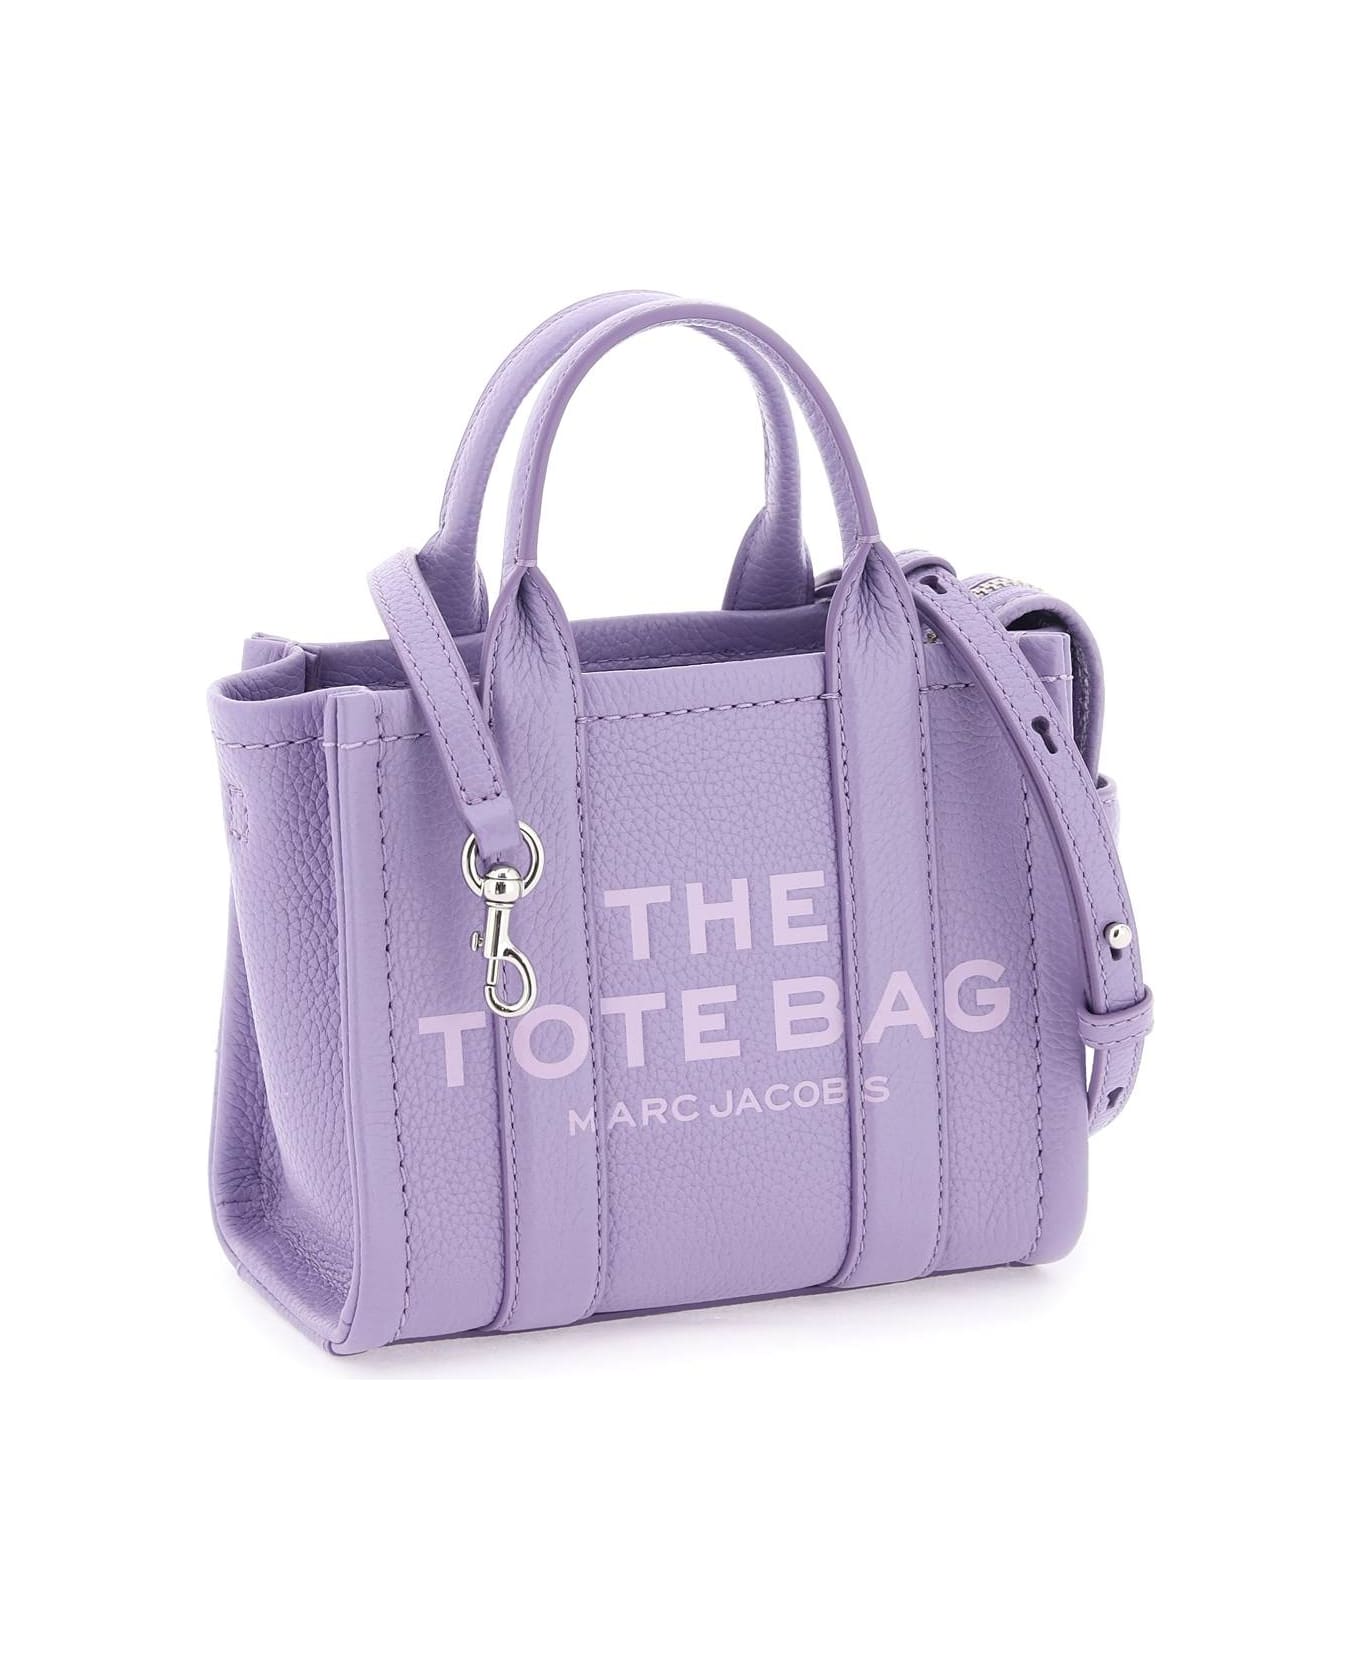 Marc Jacobs The Leather Tote Bag - LAVENDER (Purple) トートバッグ